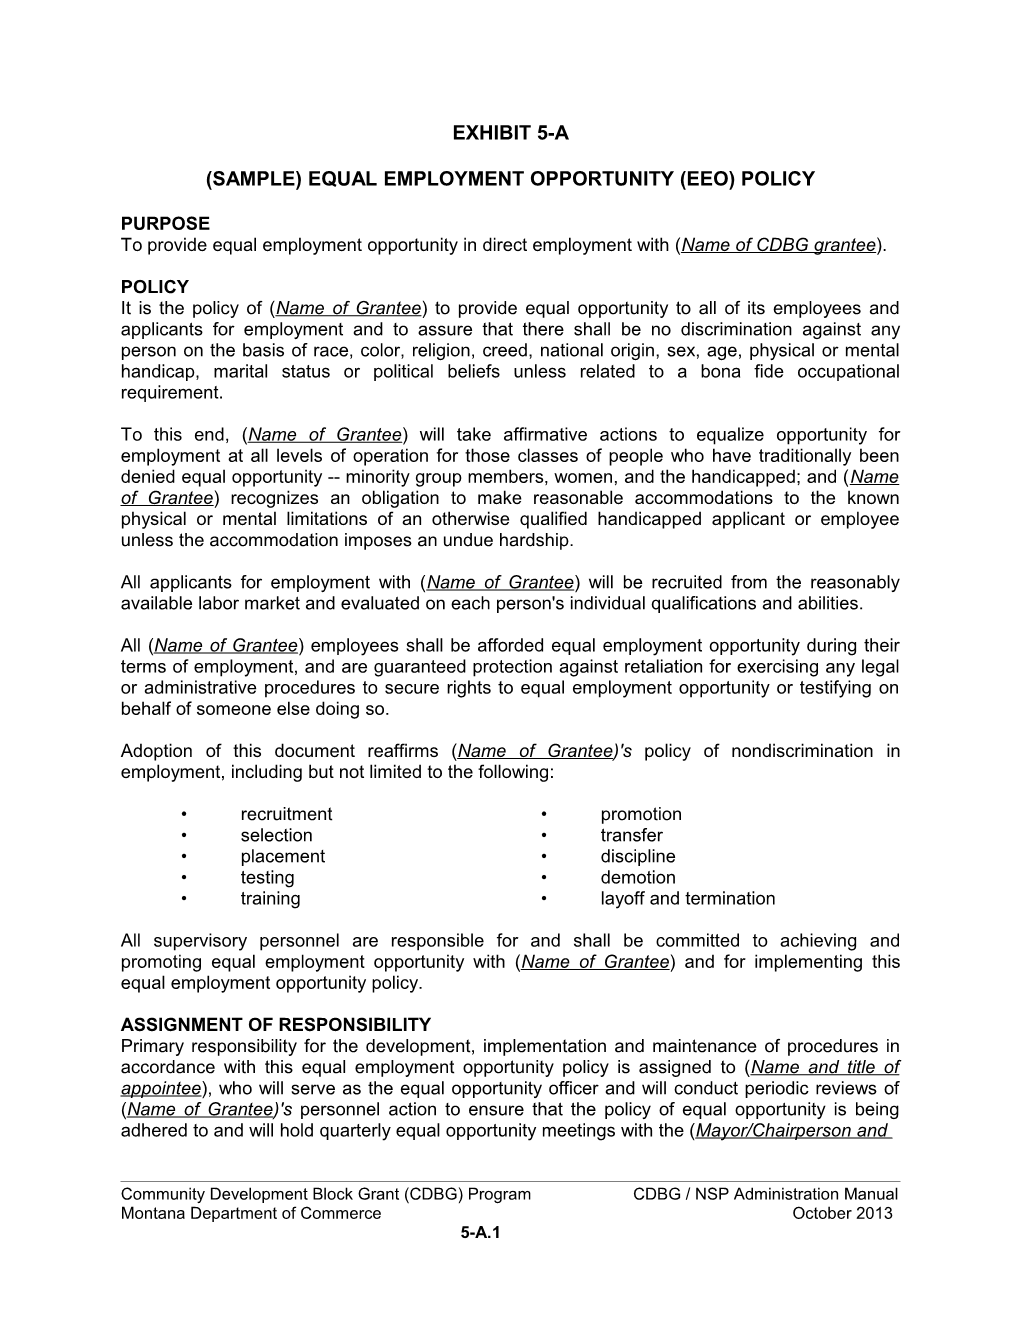 (Sample) Equal Employment Opportunity (Eeo) Policy